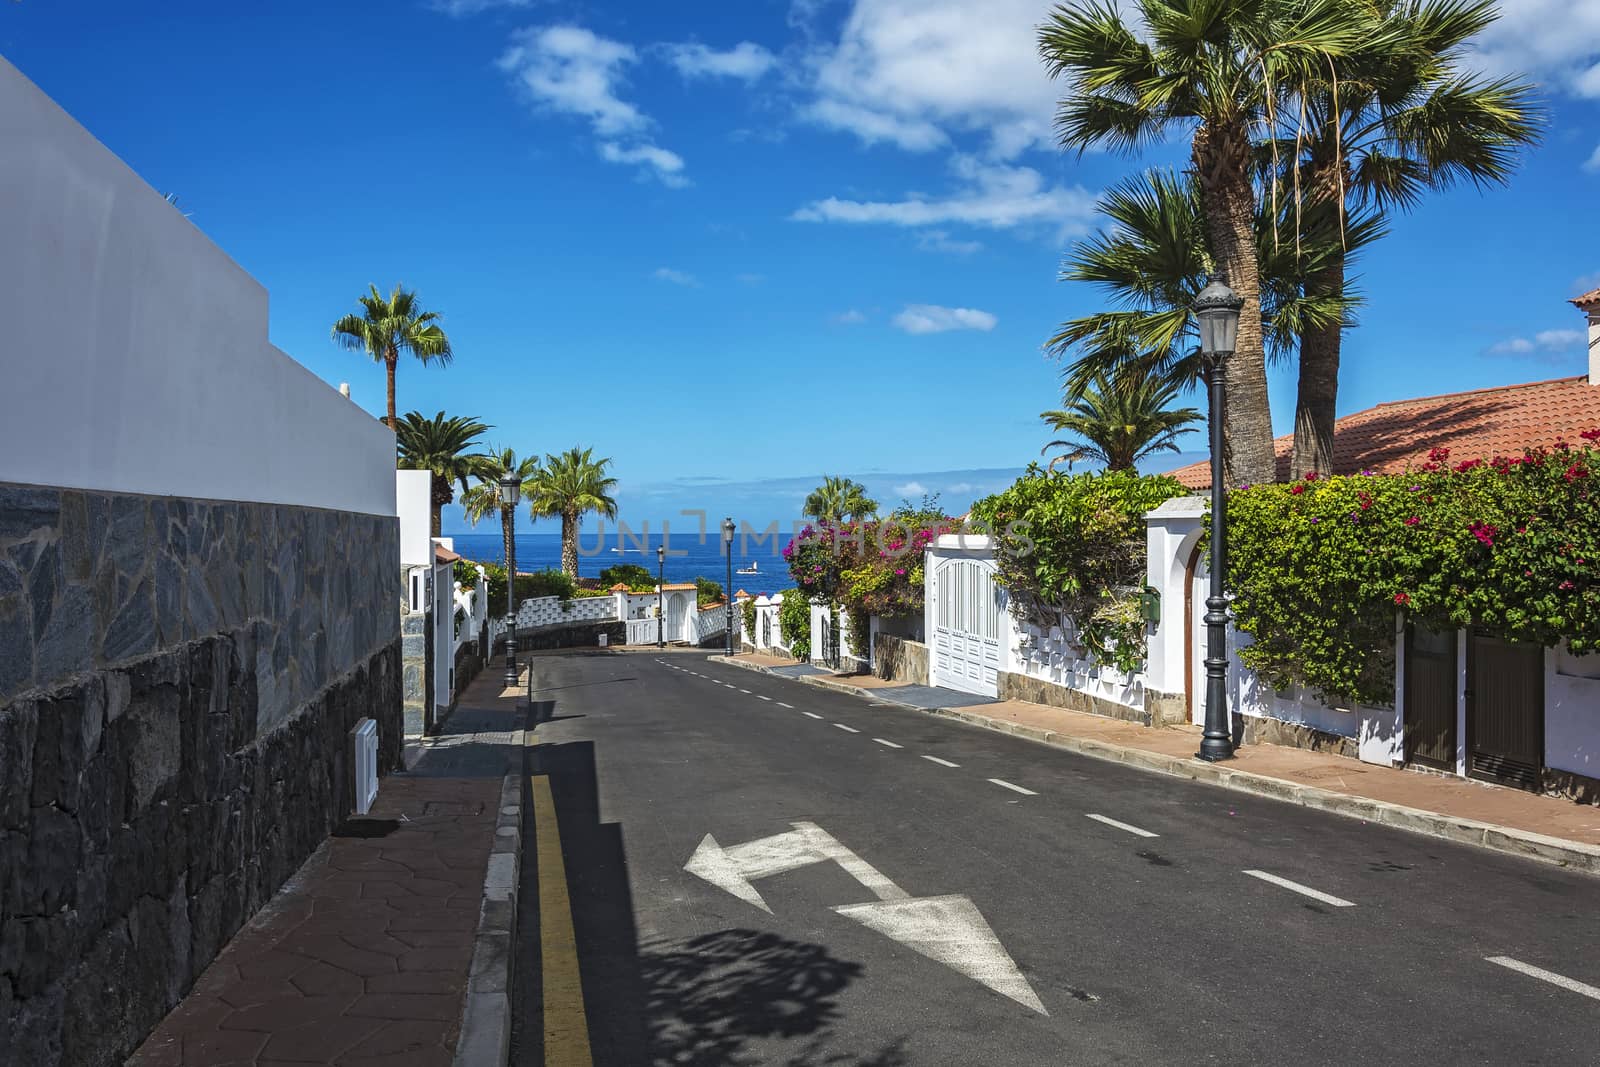 The city of scenic landscape with views of the ocean (Los Canary Islands, Tenerife, Spain)